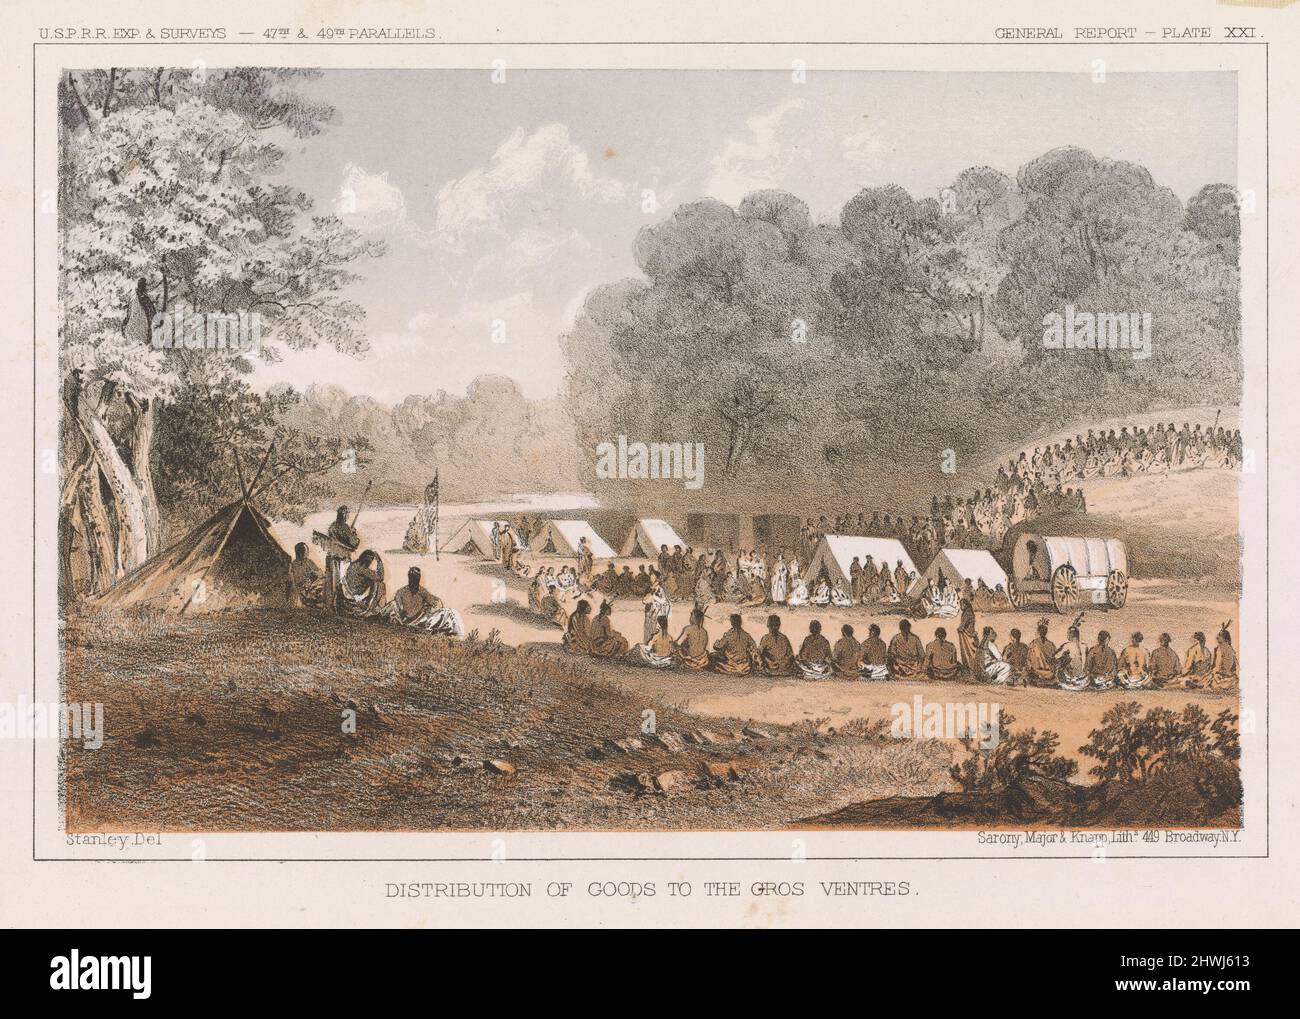 Distribution of Goods to the Gros Ventres, pl. 21 of the U.S.P.R.R. Expedition and Surveys, 47-49 parallels.  Artist: Sarony, Major & Knapp, New York, founded ca. 1846After: John Mix Stanley, American, 1814–1872 Stock Photo